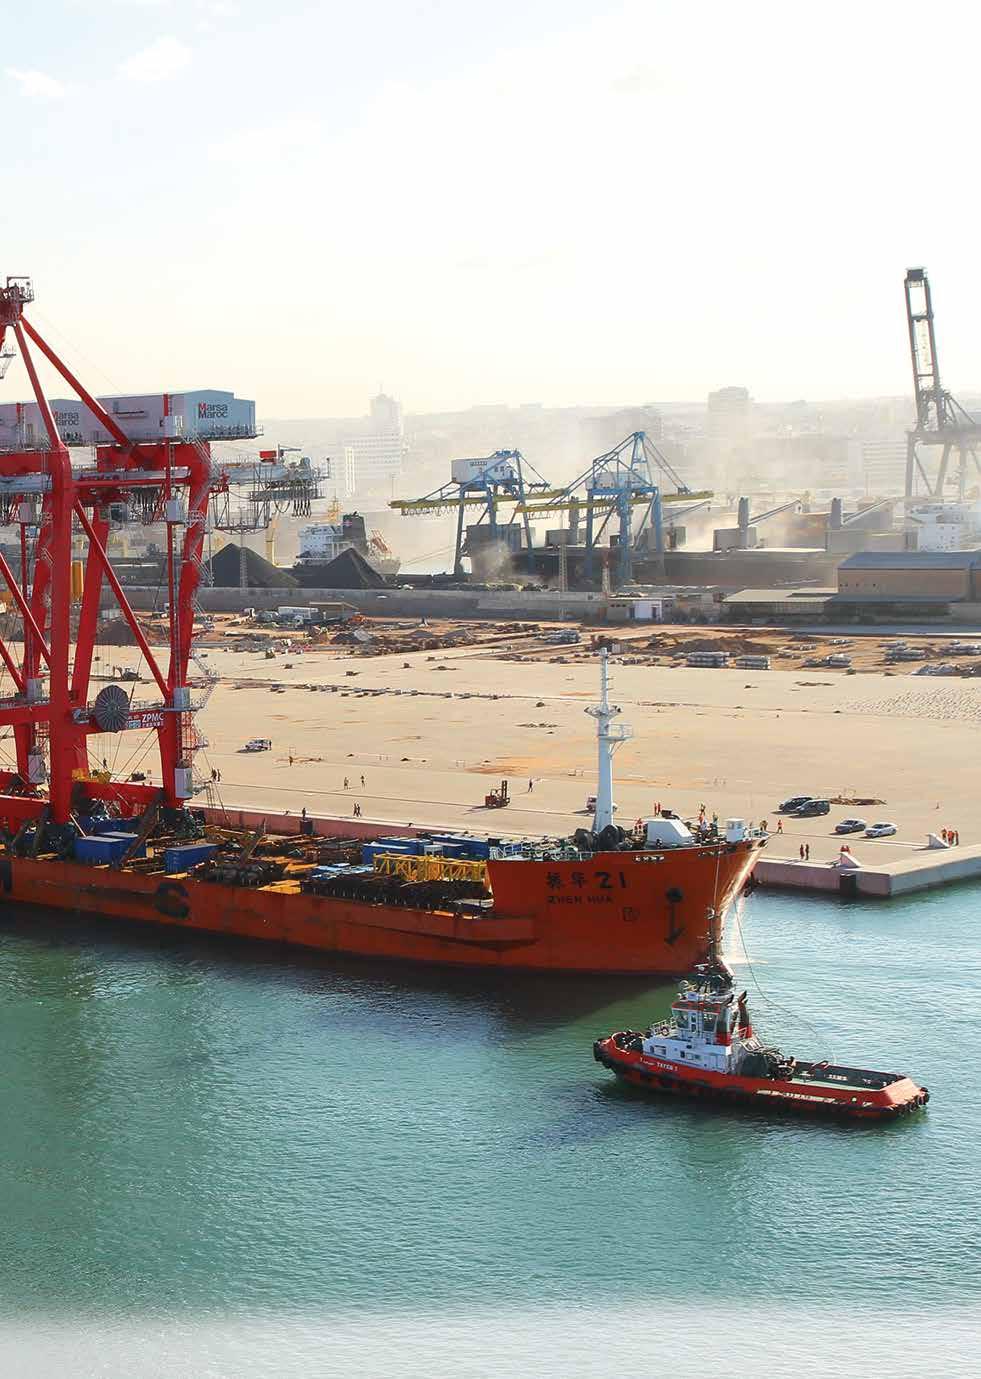 The CSR : At the core of our strategy and activities A committed employer Human profile As a port operator, Marsa Maroc has to develop a wide range of specific and specialized functions and